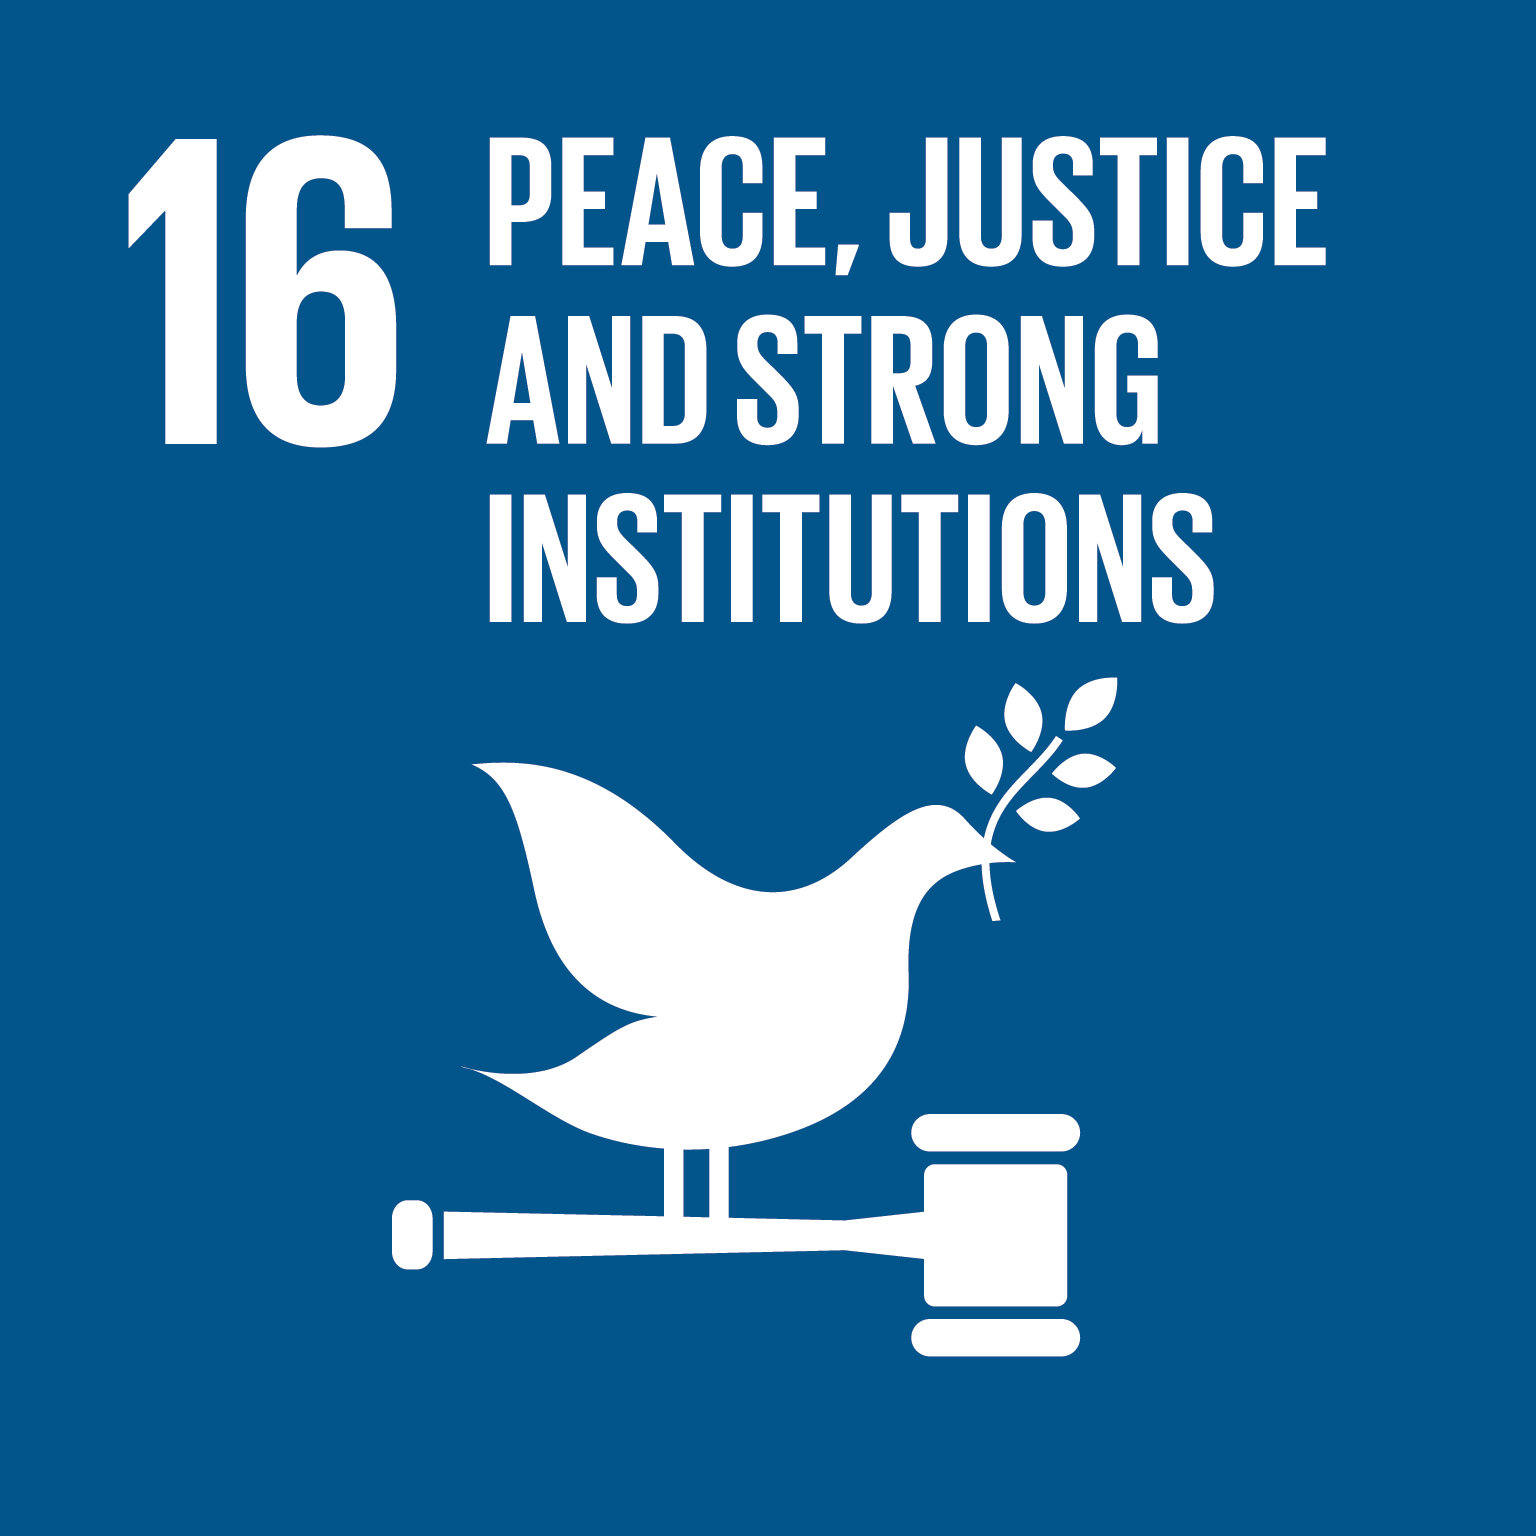 16. Peace, justice, and strong institutions